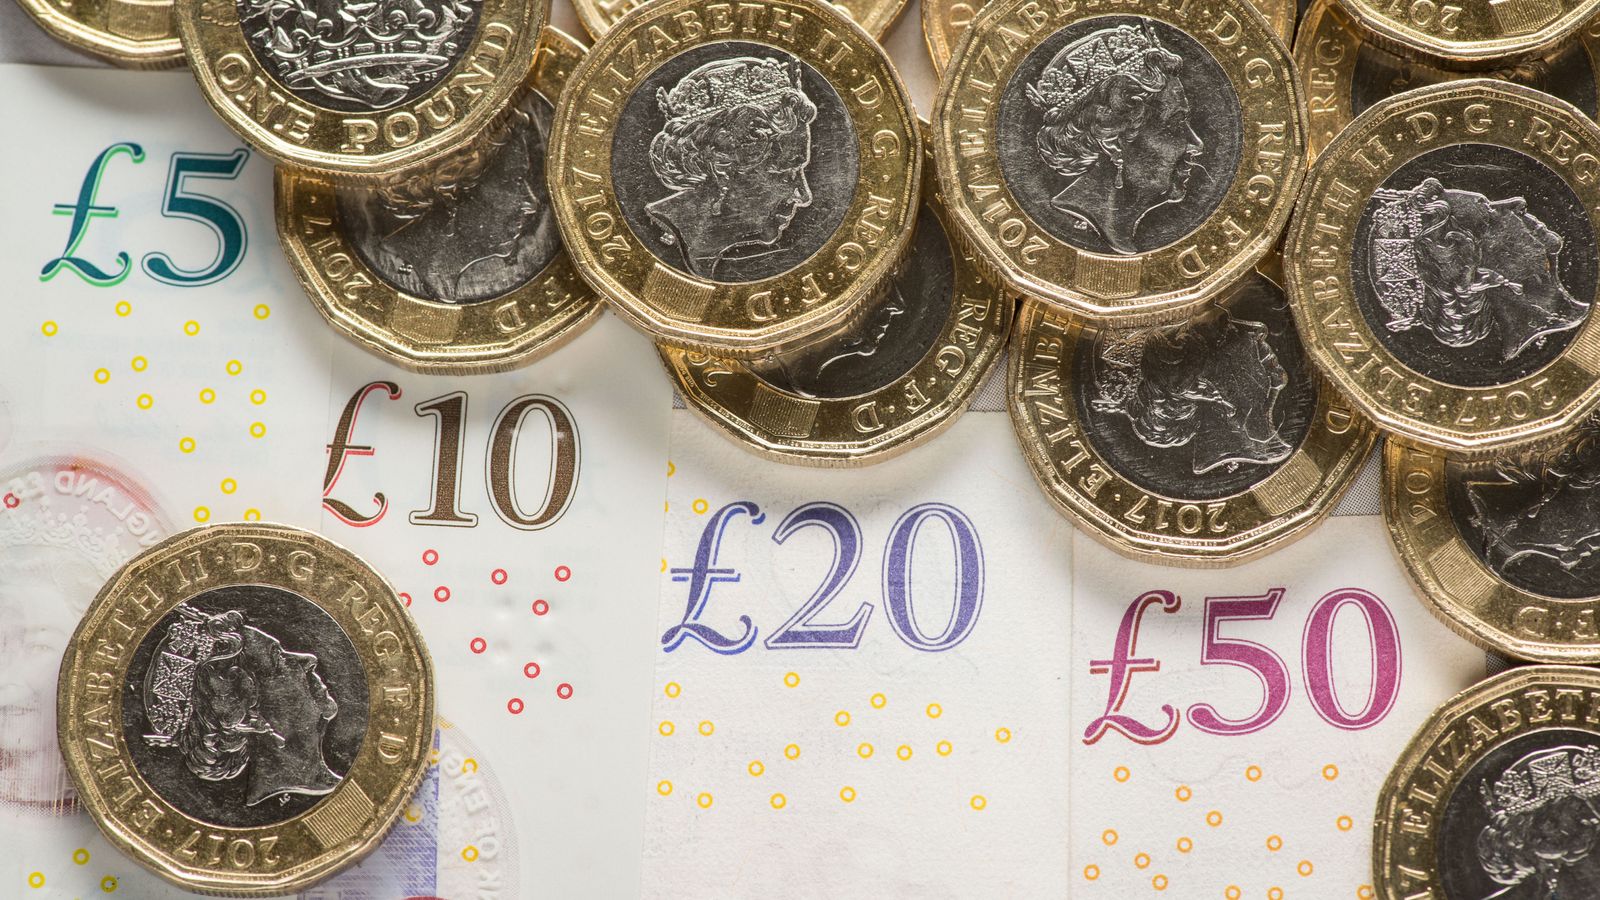 Cash use grows for first time in 10 years as people pay closer attention to household budgets